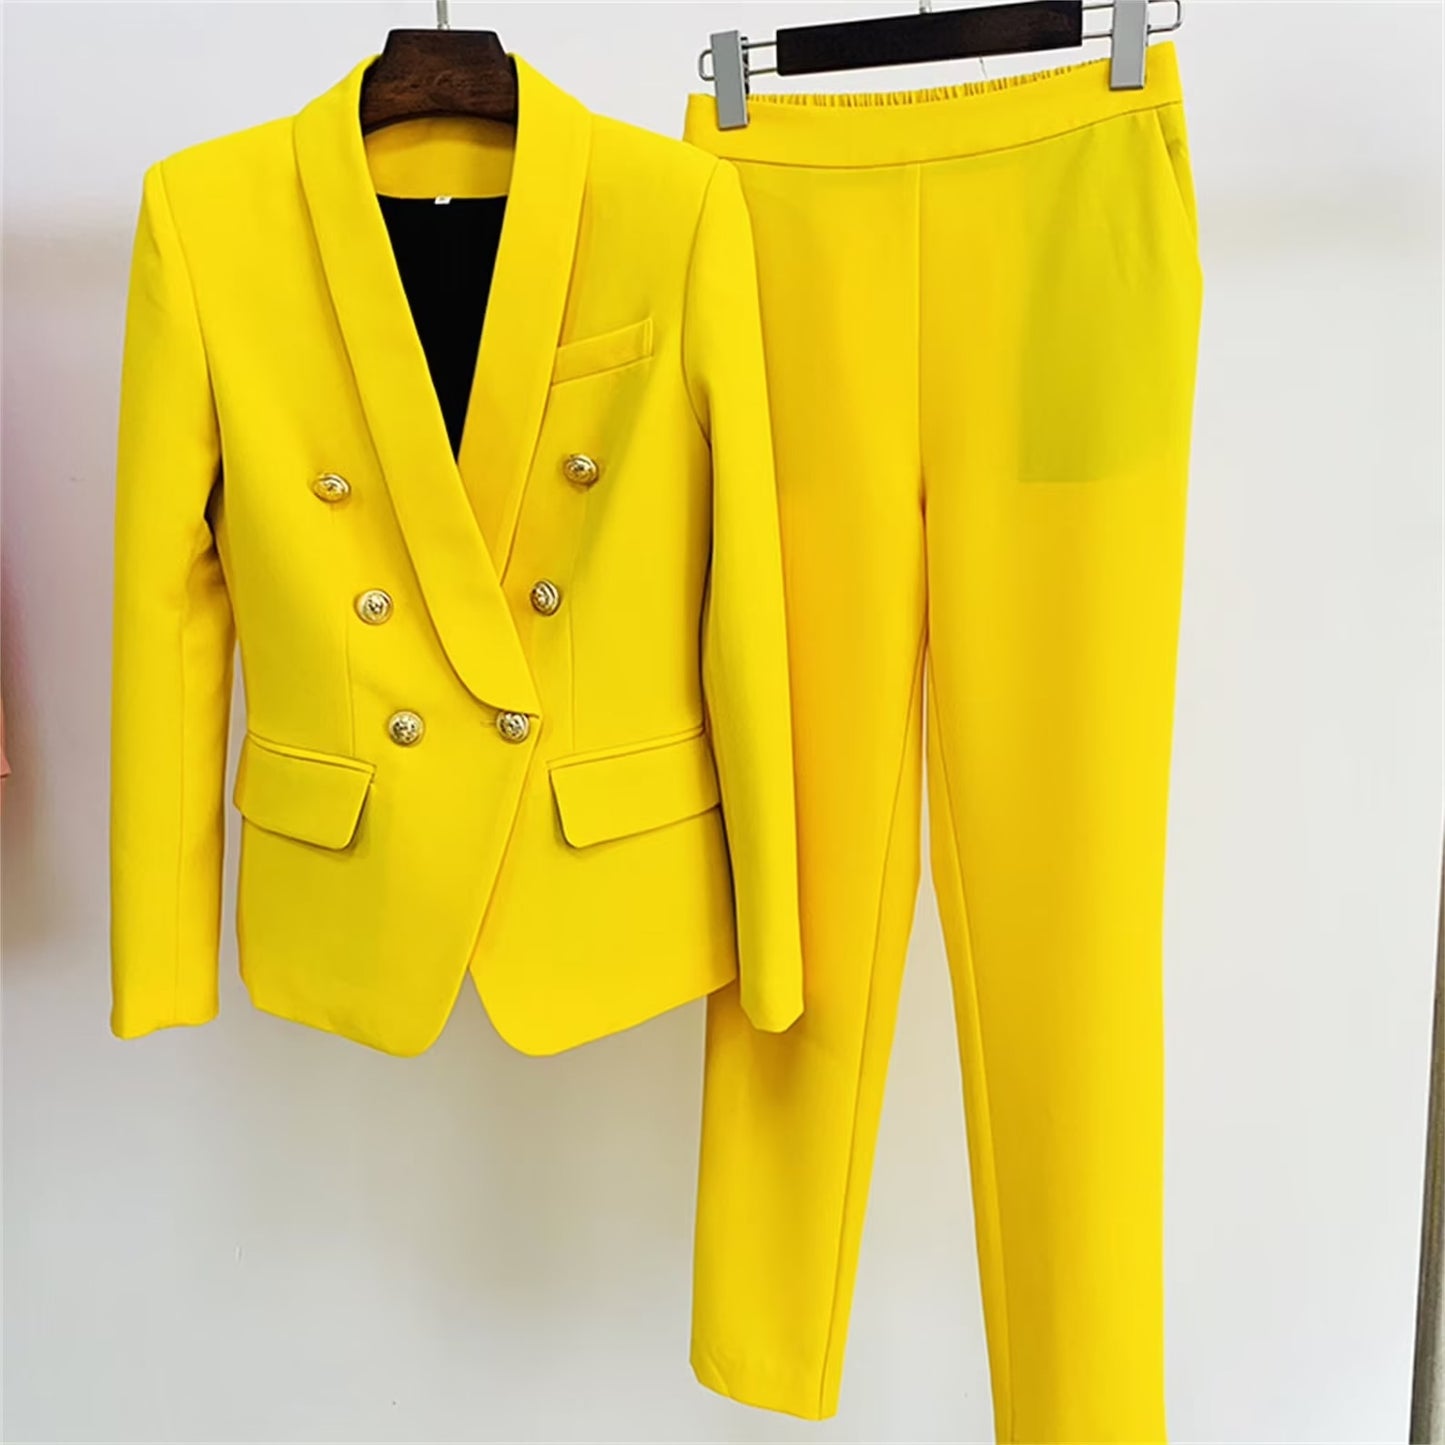 Shawl Collar Golden Buttons Blazer + Crop Trousers Suit Yellow UK CUSTOMER SERVICE!   Shawl Collar Golden Buttons Blazer + Crop Trousers Suit Yellow - Can worn for business meeting, daily wear, formal date, office work, vacation and outdoor activities. Classic fashion design, the simple and Shawl Collar neck line. Fully lined with black and Lion buttons. Also, Blazer can worn for party or outside with suitable pants or bottom.  Polyester Fastening: Button Slim Long Sleeve